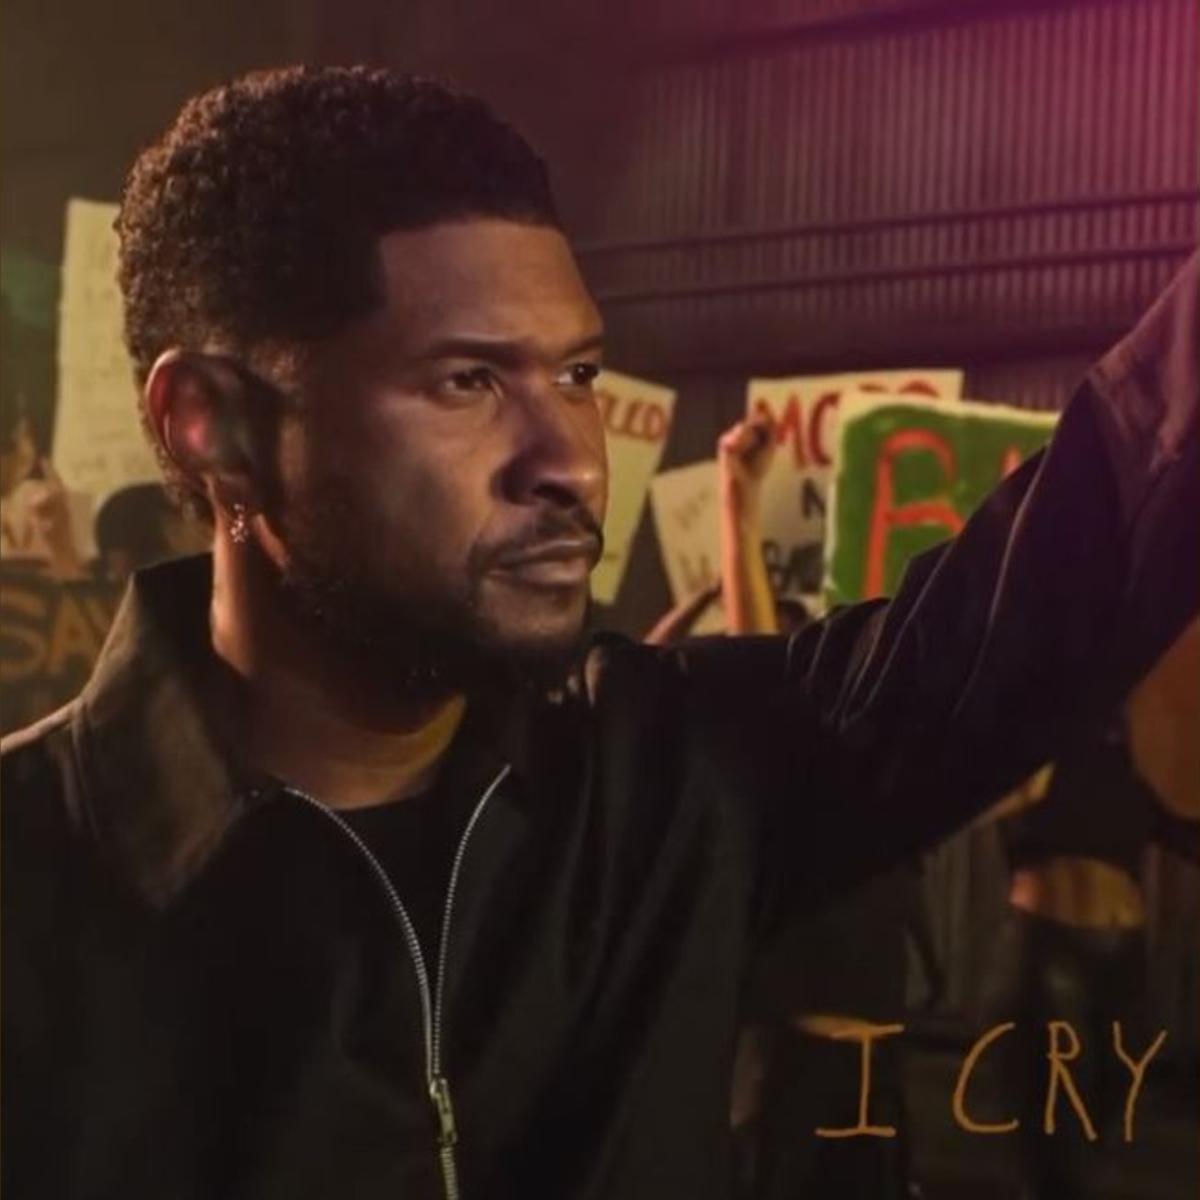 Usher Pours His Heart Out On “I Cry”